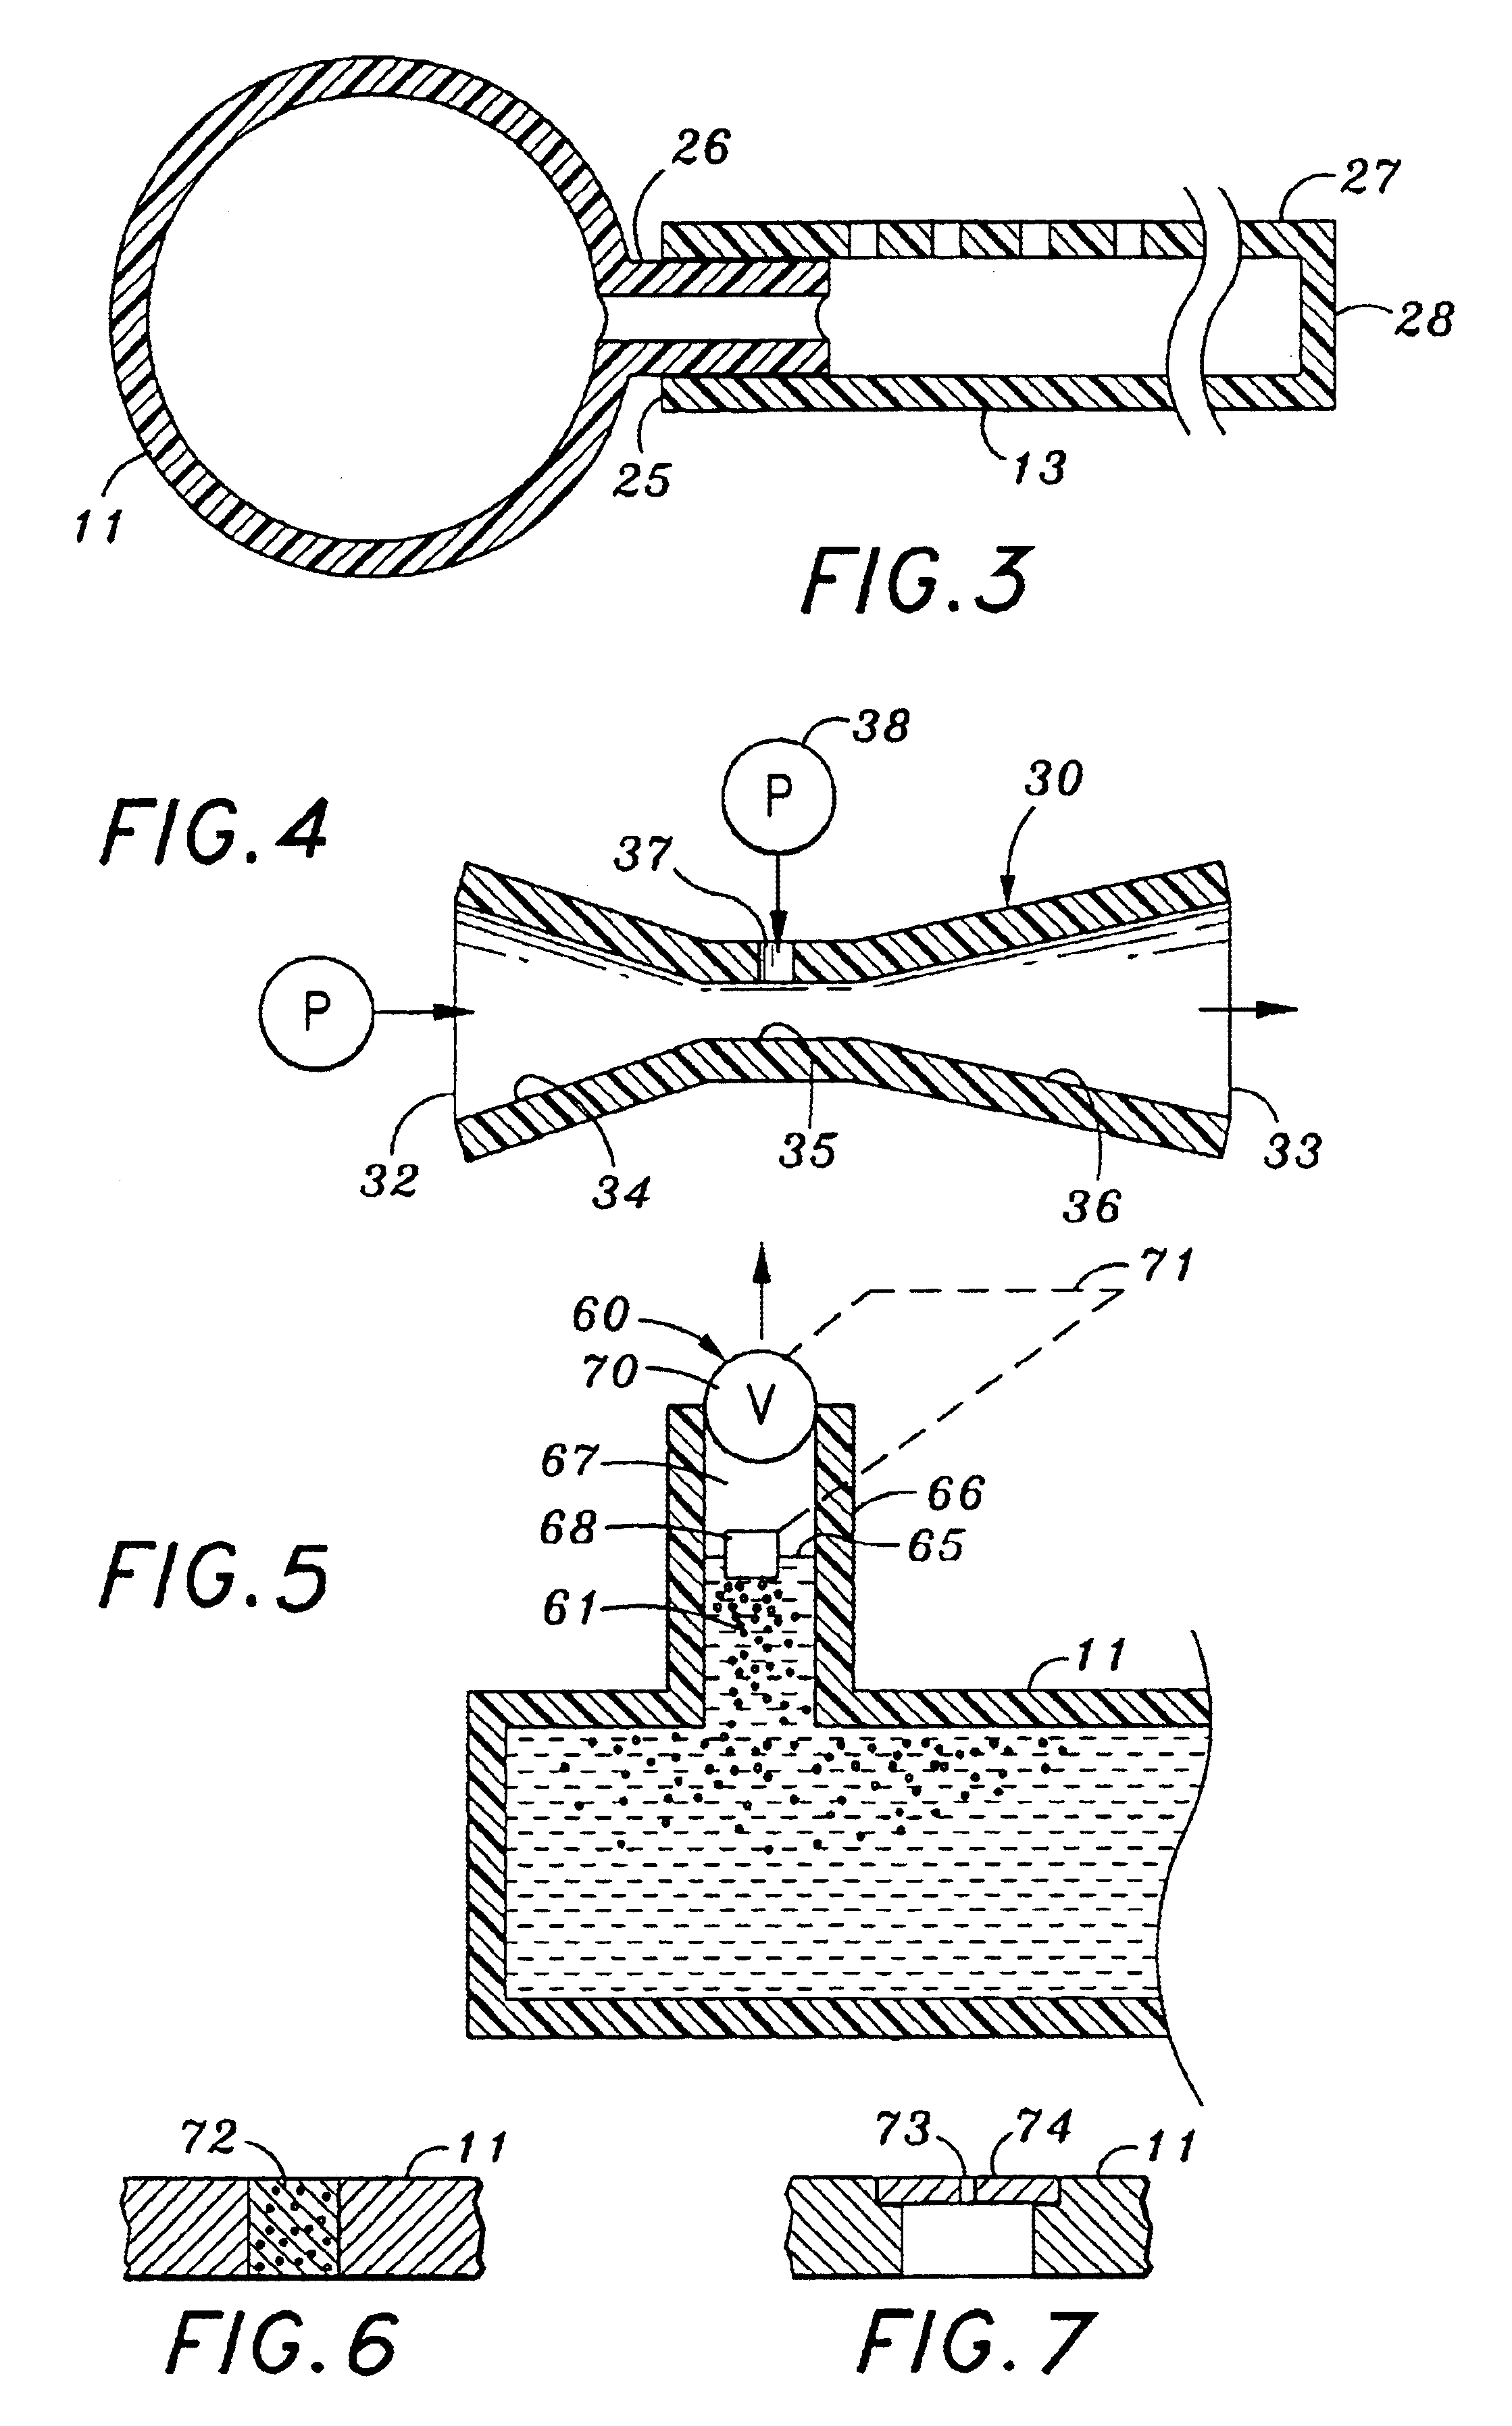 Subsurface water/air irrigation system with prevention of air lock